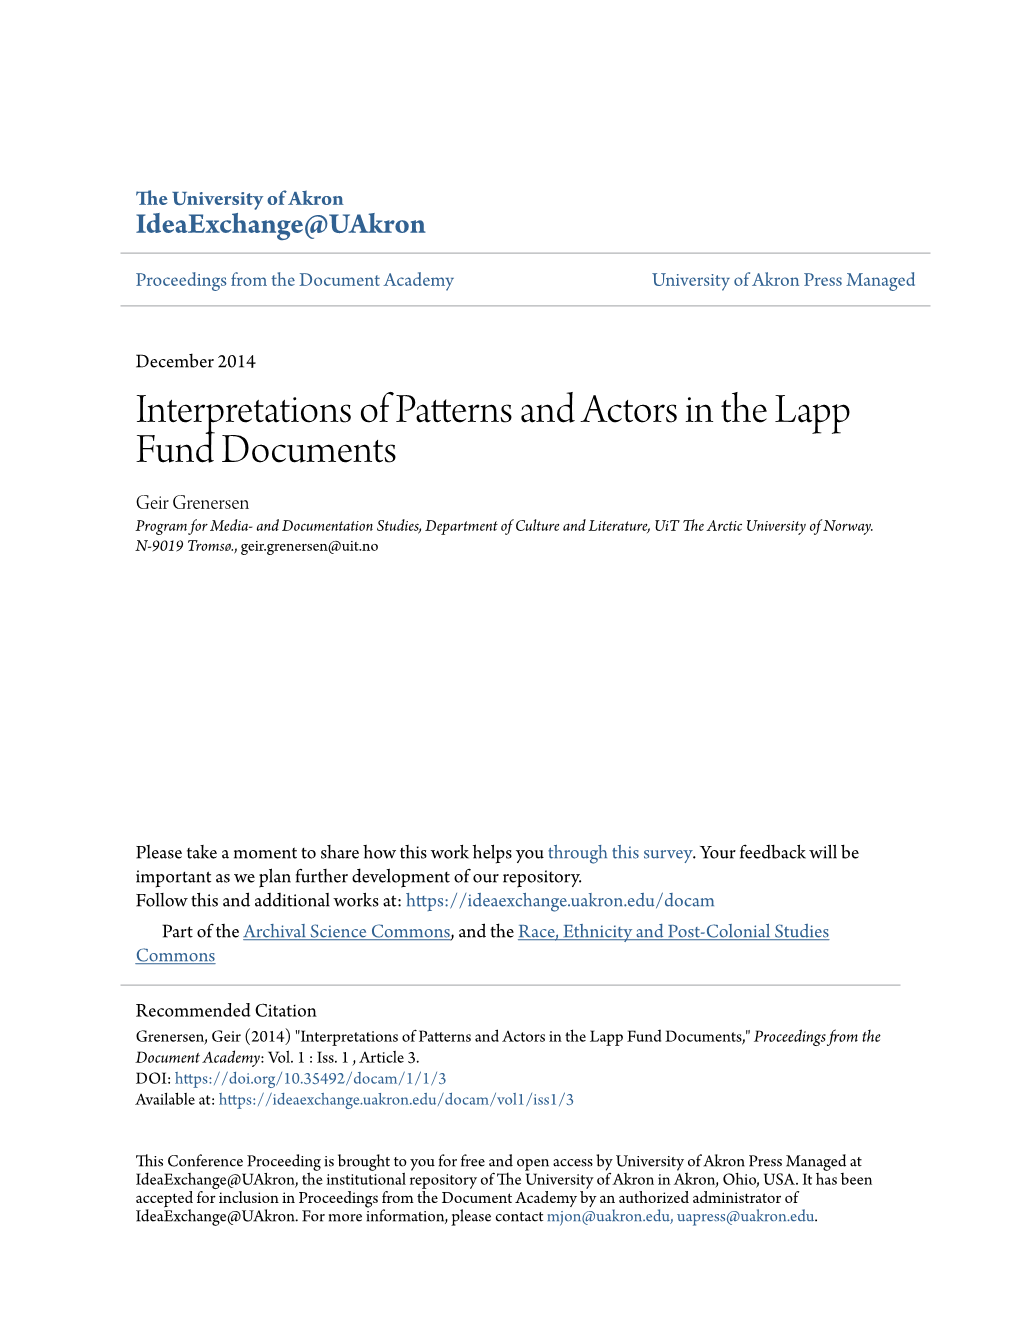 Interpretations of Patterns and Actors in the Lapp Fund Documents